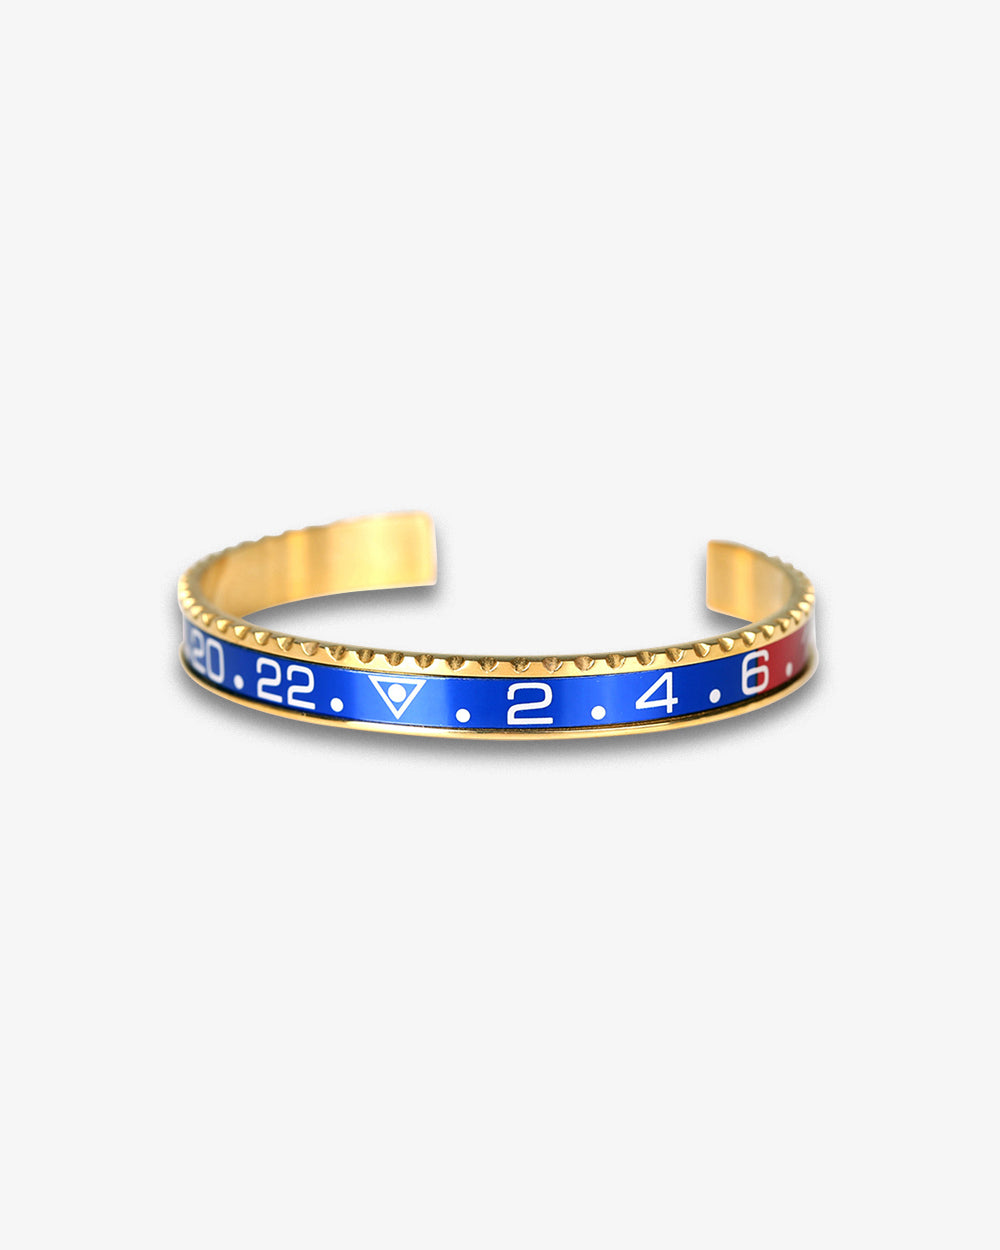 Swiss Concept Classic Dual Time GMT II 'Pepsi' Speed Bracelet (Yellow Gold) - Stainless Steel